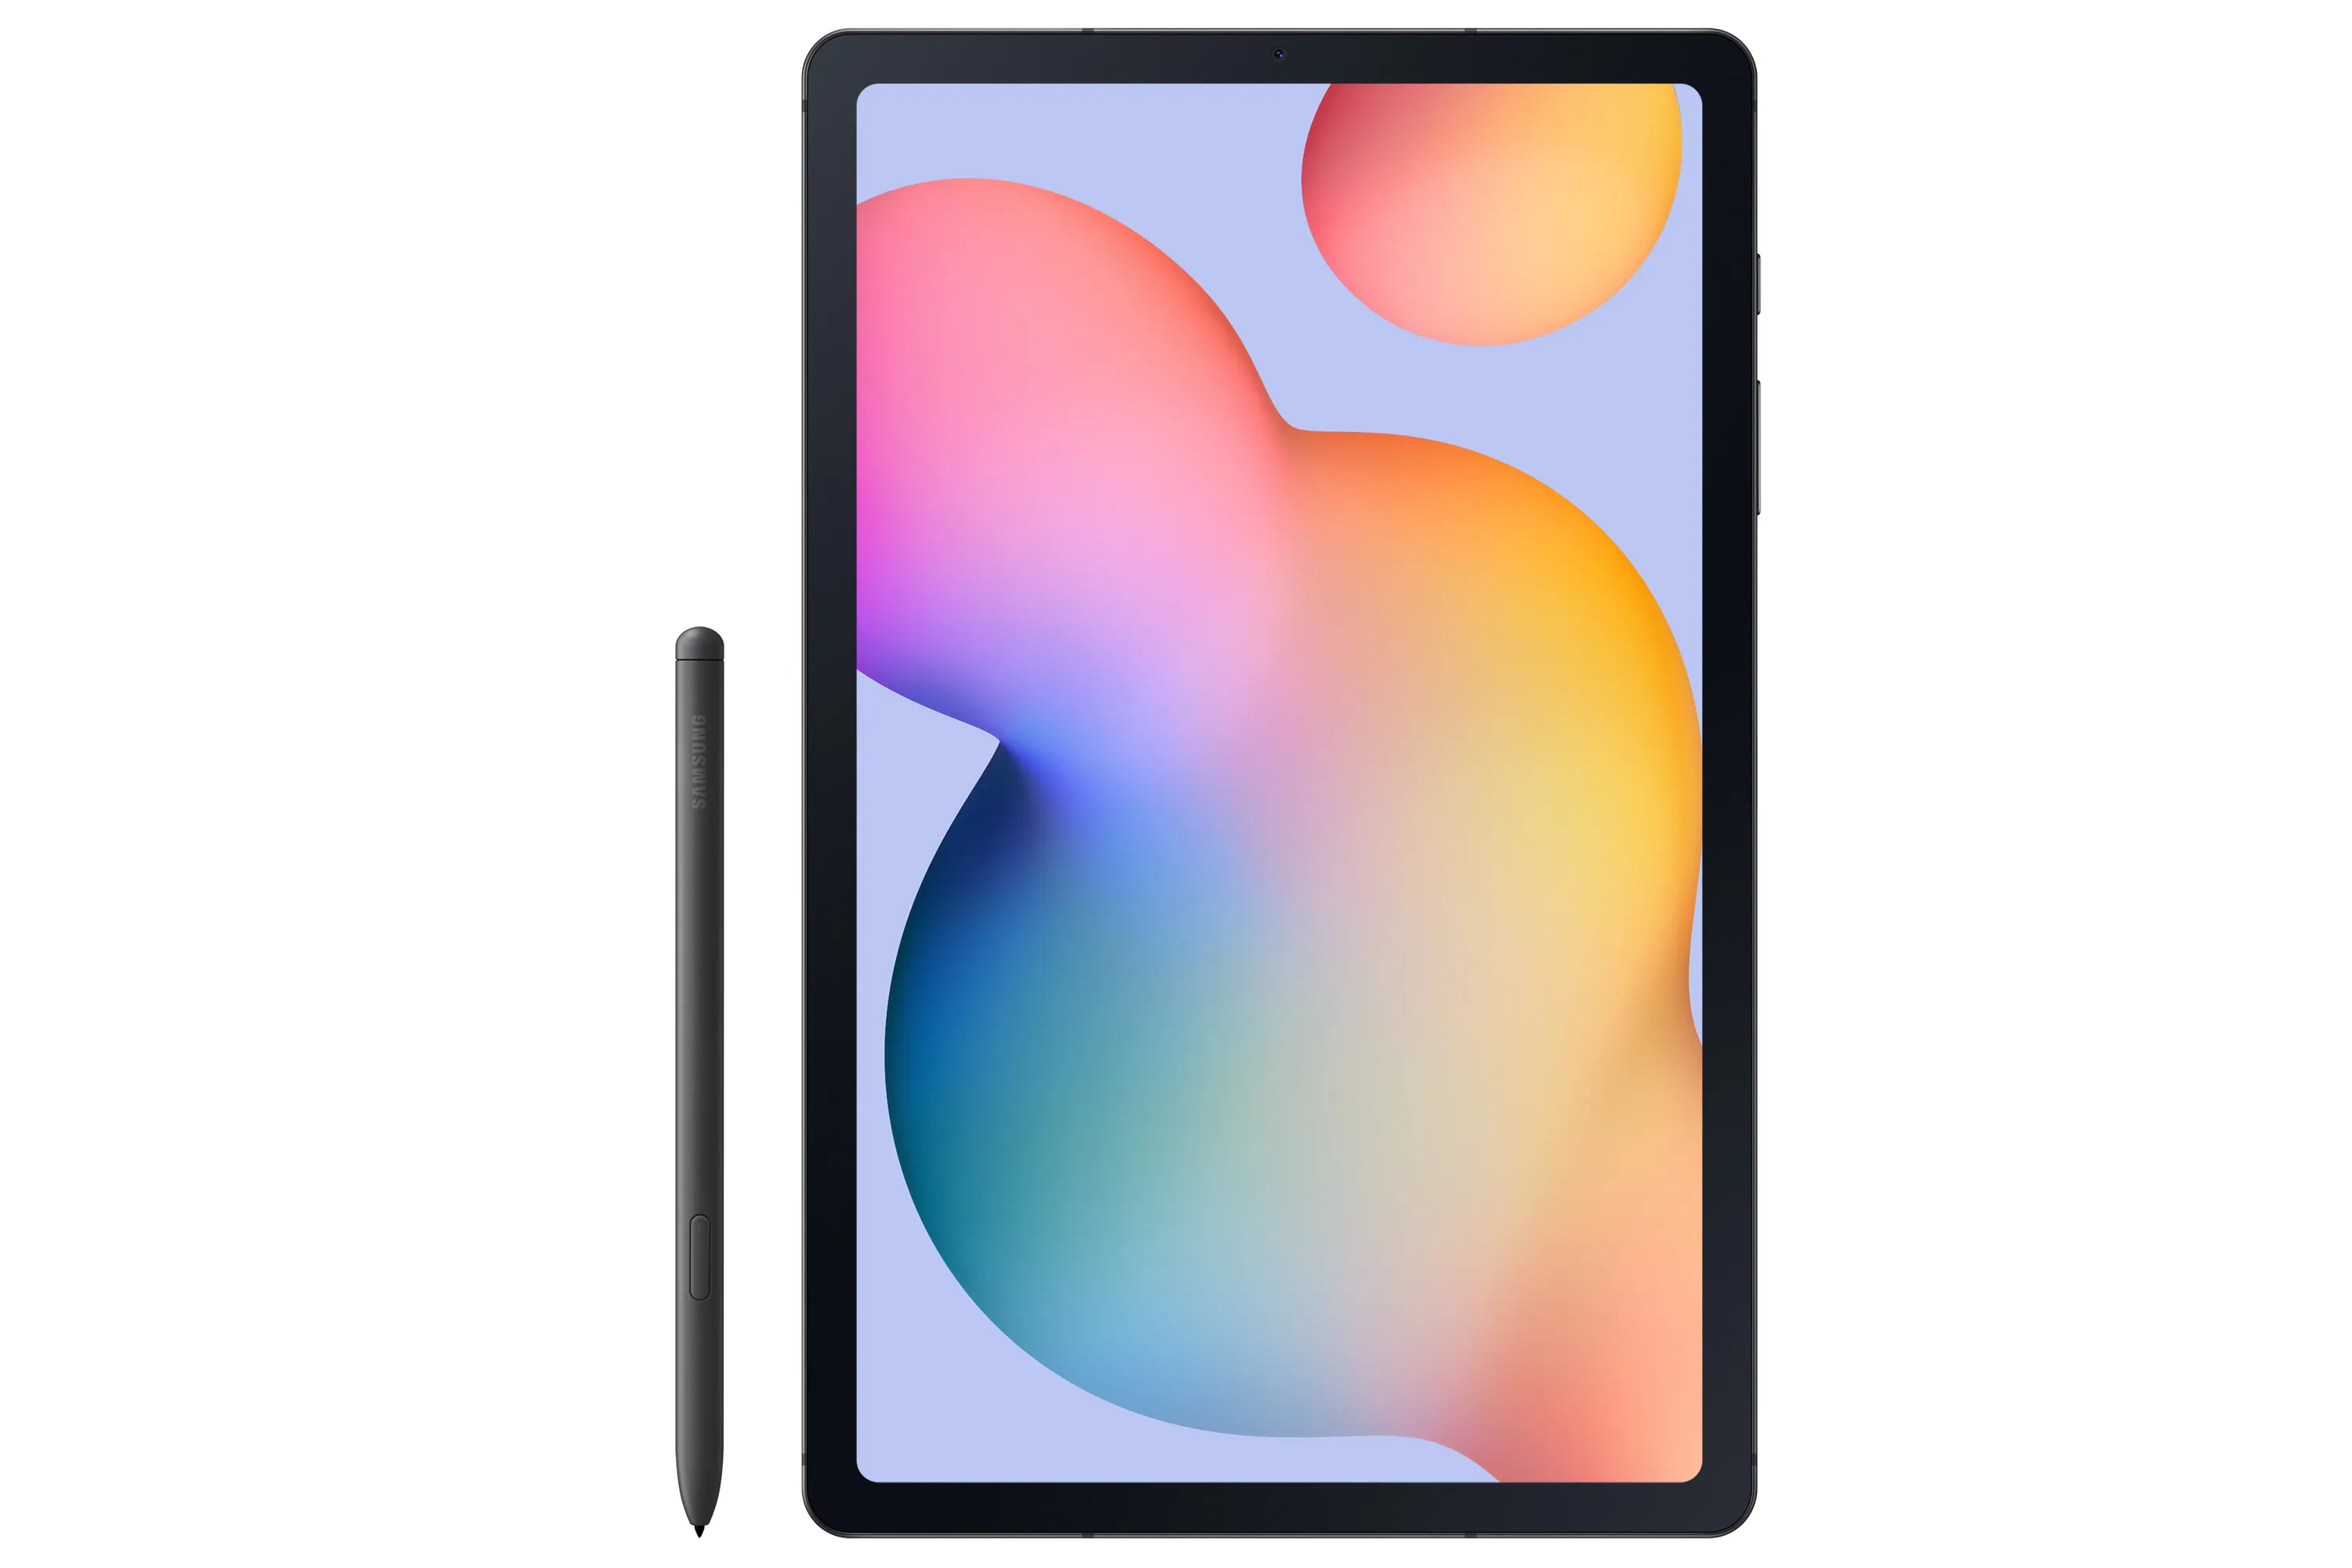 Samsung Galaxy Tab S6 Lite - Tablet - Android - 64 GB - 10.4" Zoll